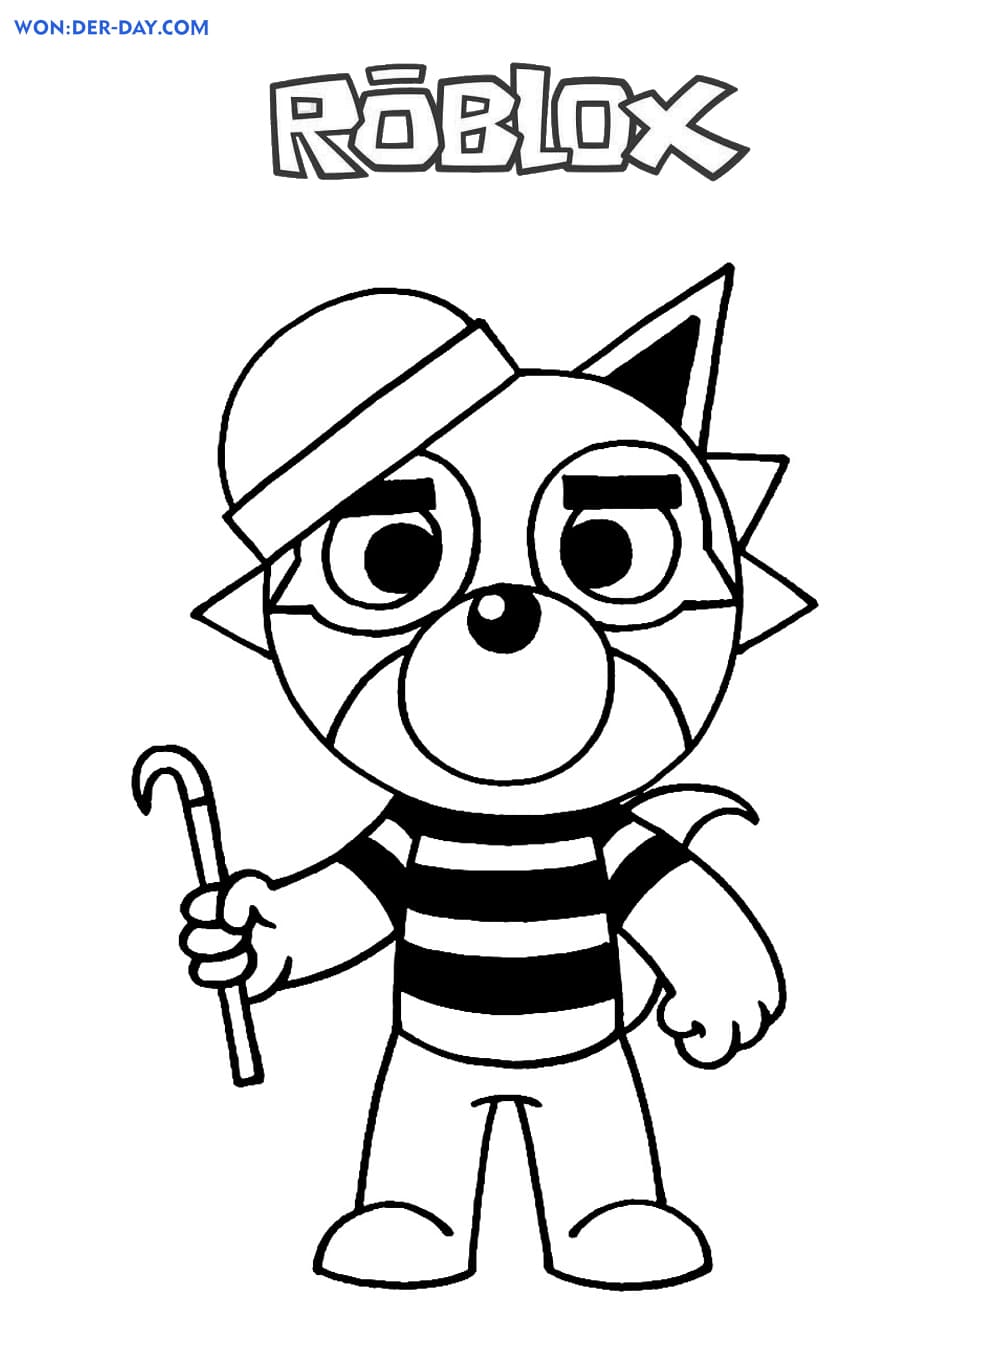 Piggy Roblox Coloring Pages Wonder Day Coloring Pages For Children And Adults - roblox piggy coloring pages printable